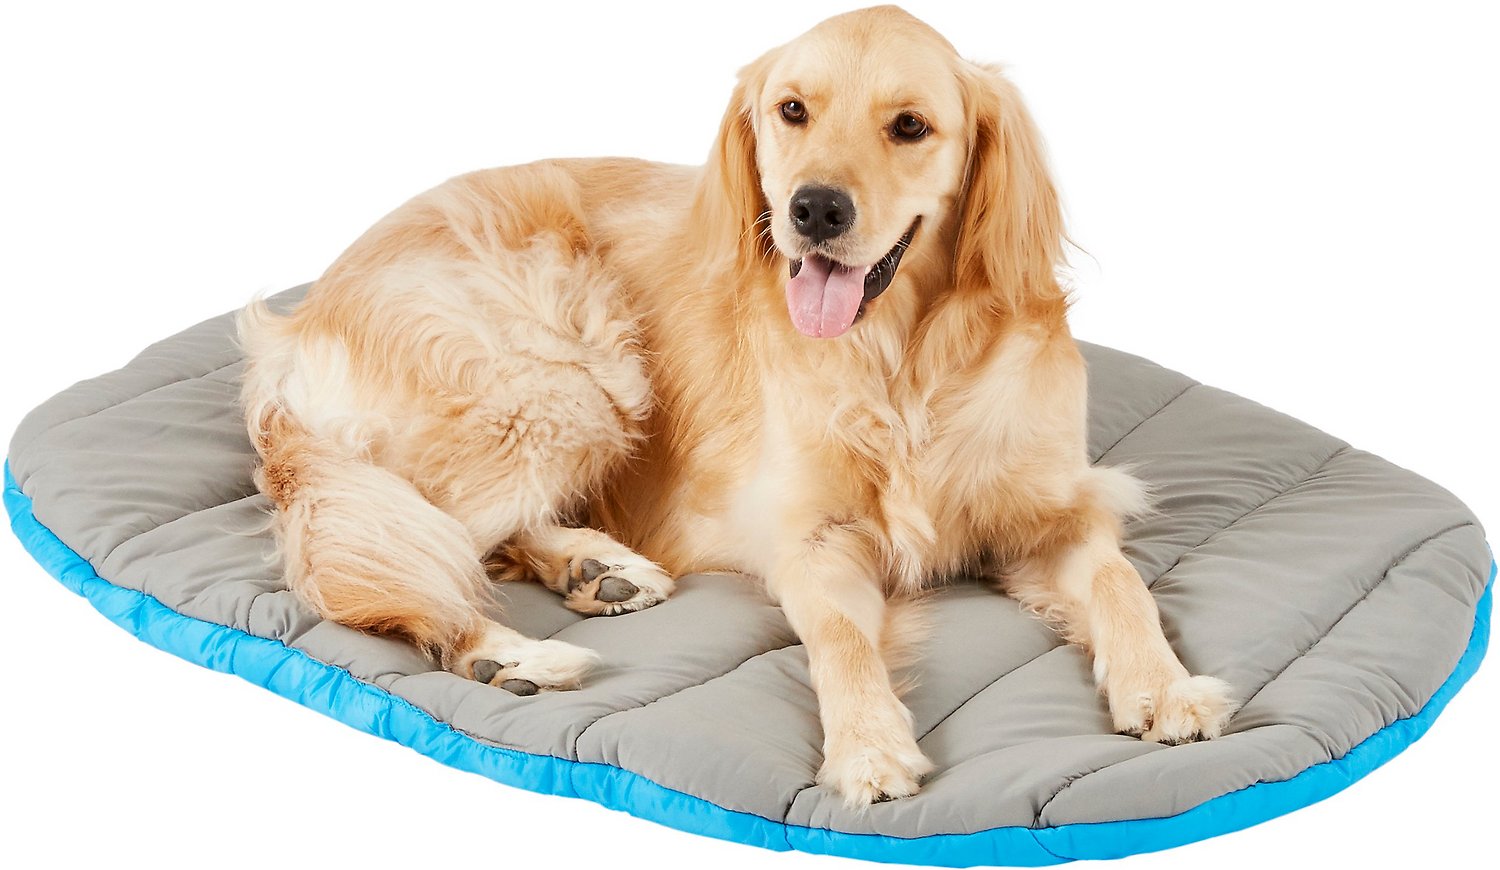 Dog Camping Bed: Things To Consider When Buying One